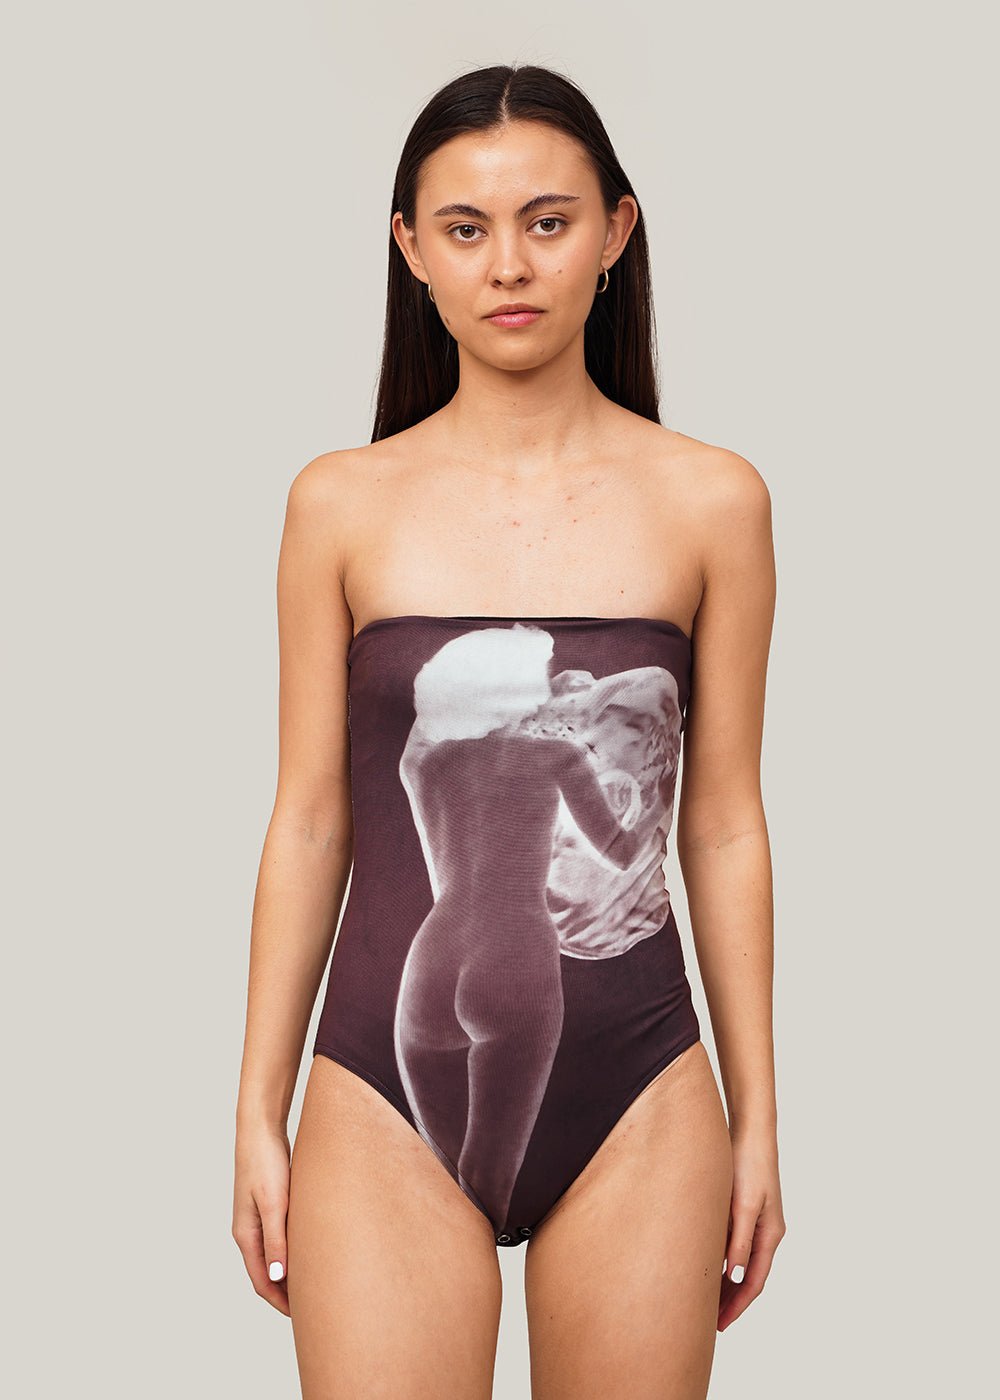 ELLISS Surreal Creature Jersey Bodysuit - New Classics Studios Sustainable Ethical Fashion Canada